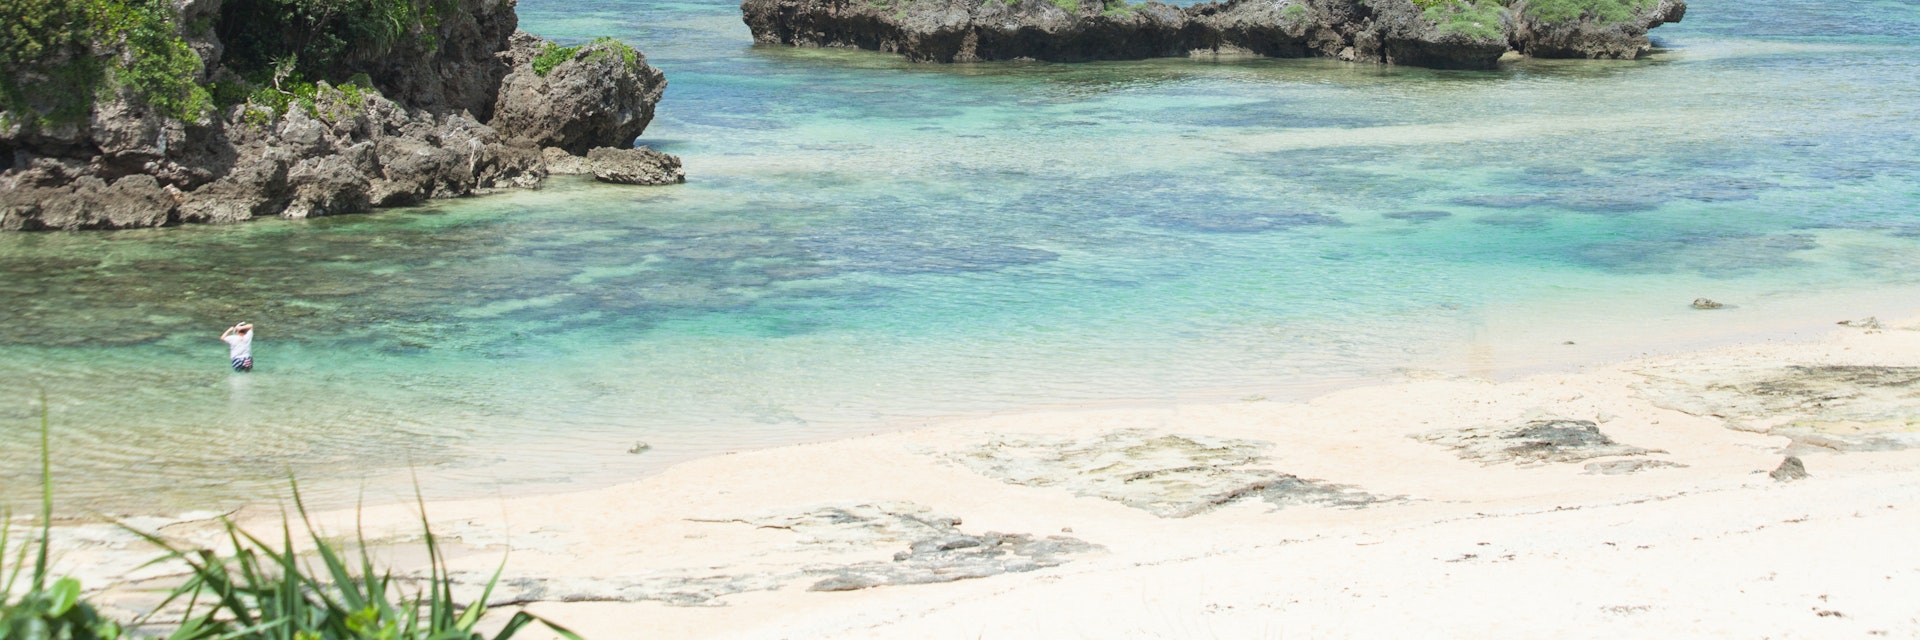 Coral lagoon beach and clear water, Iriomote-jima